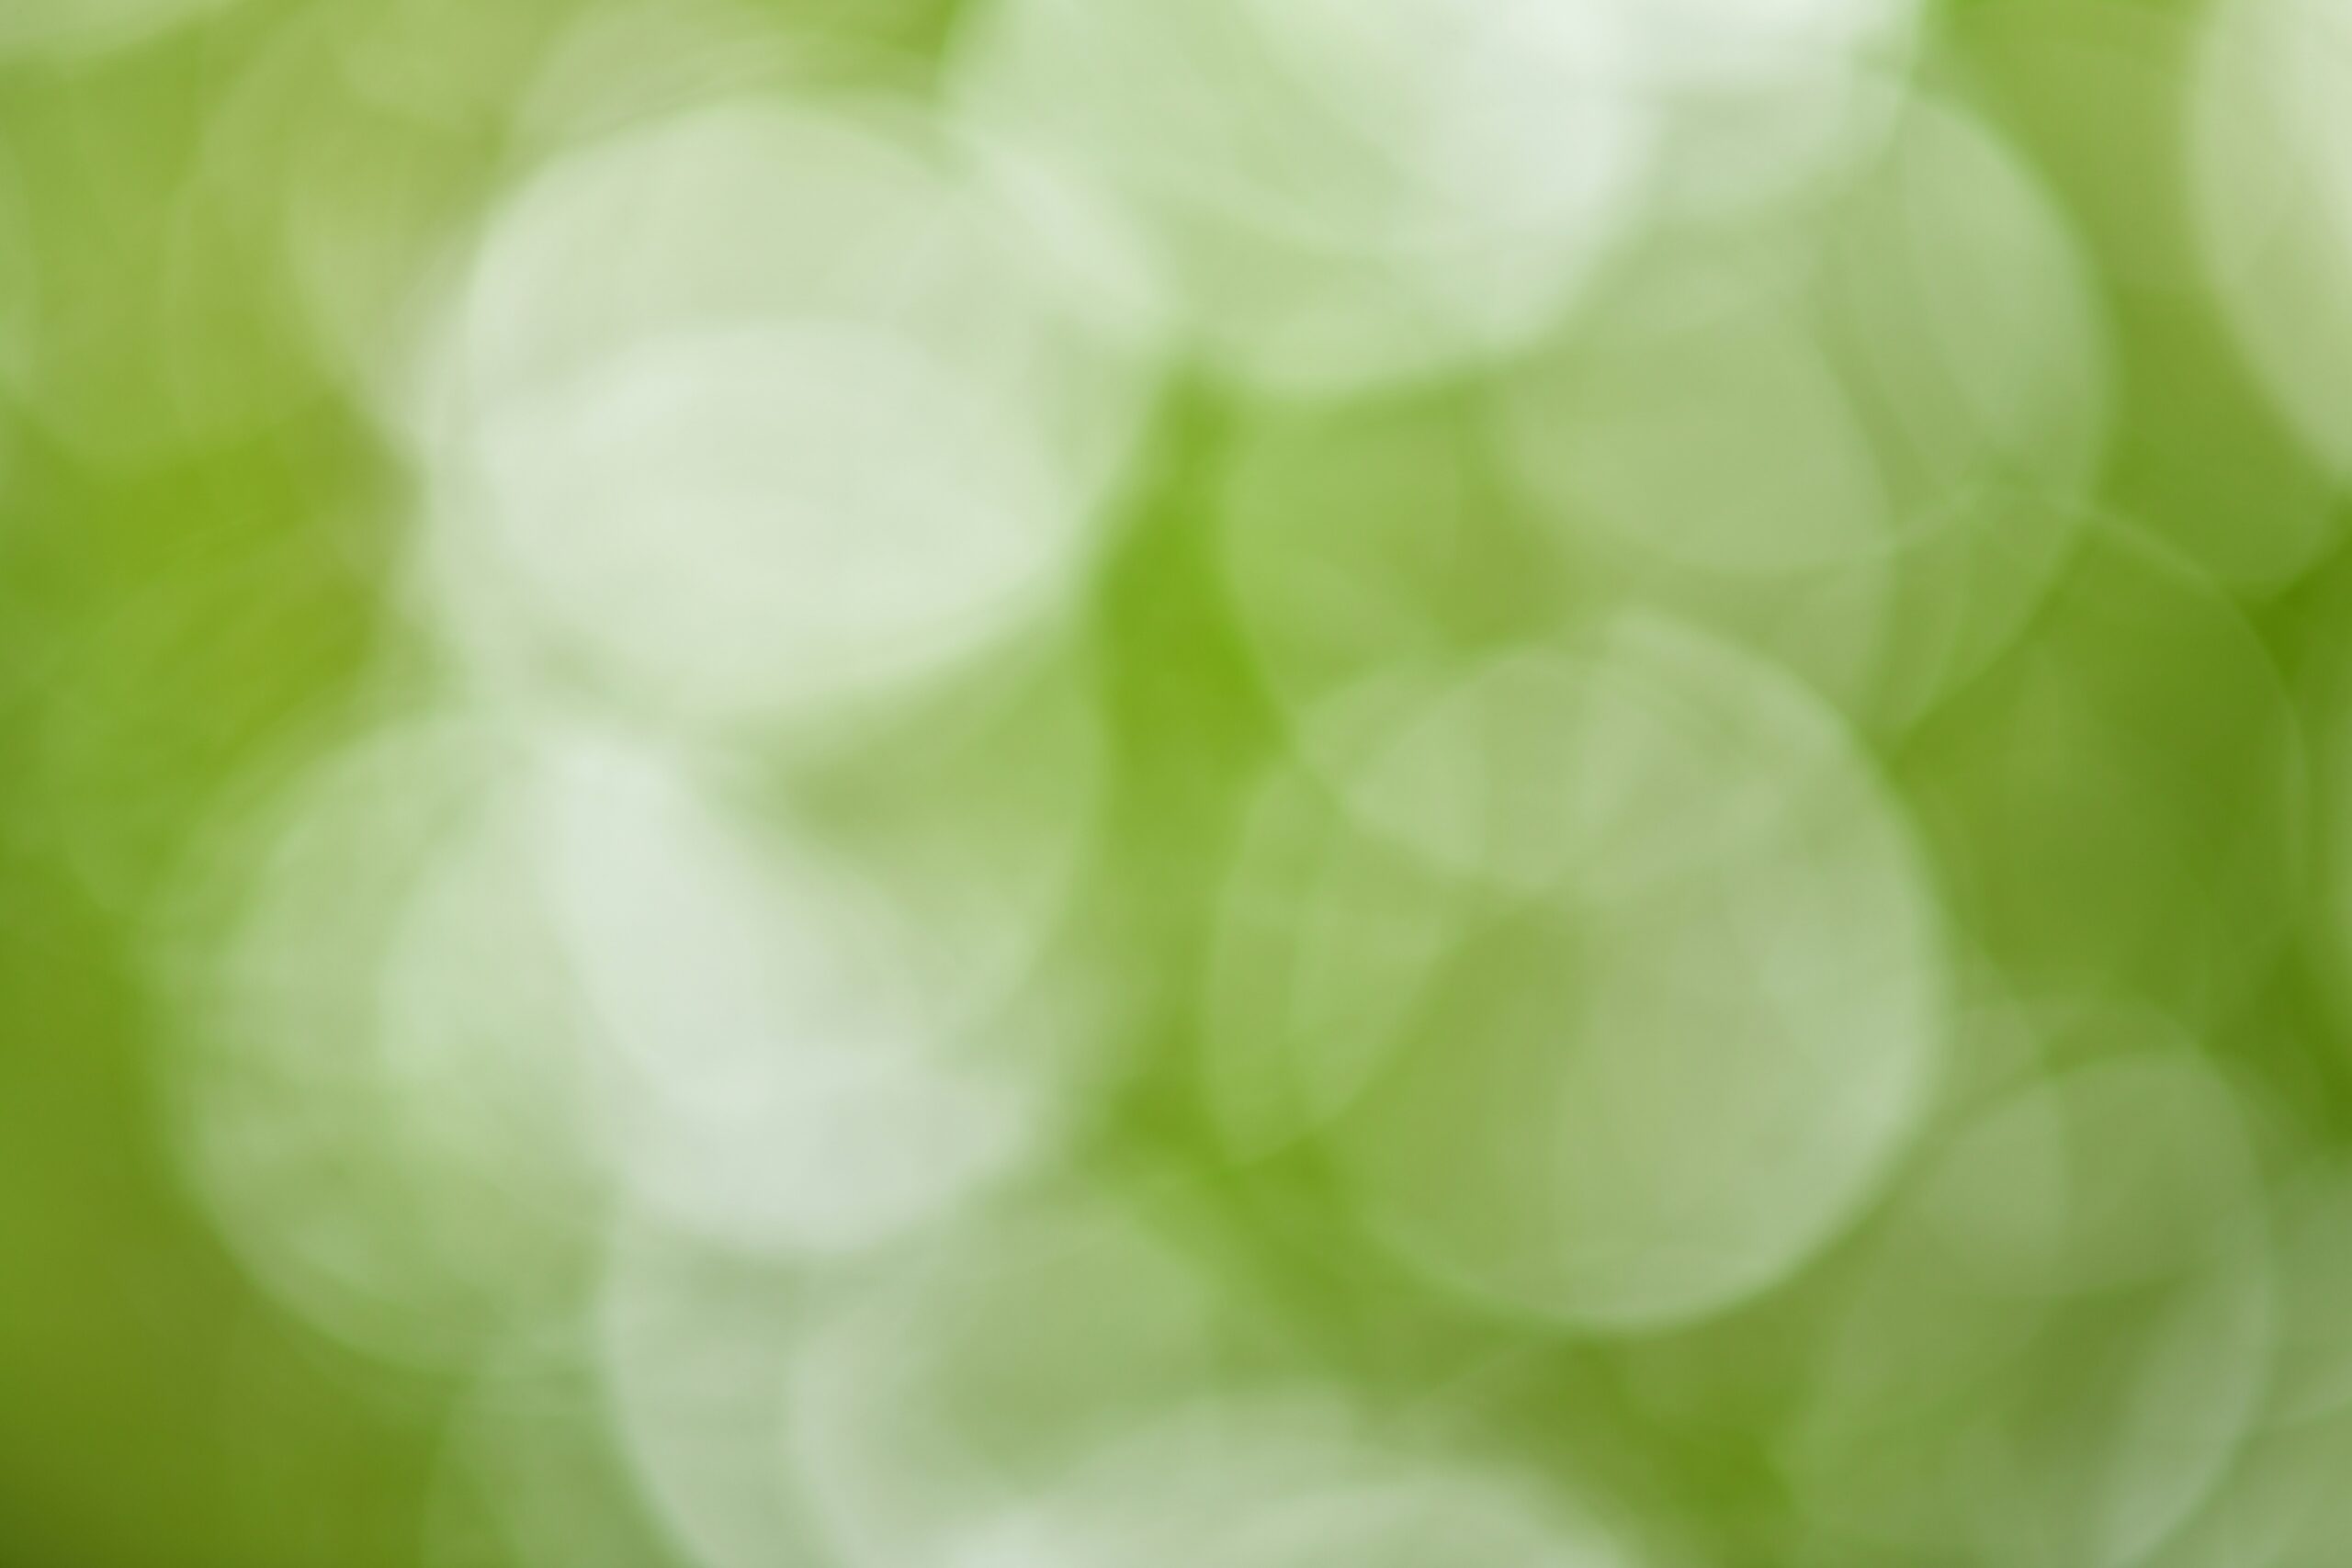 Abstract green bokeh background formed by out-of-focus light circles in a natural setting.